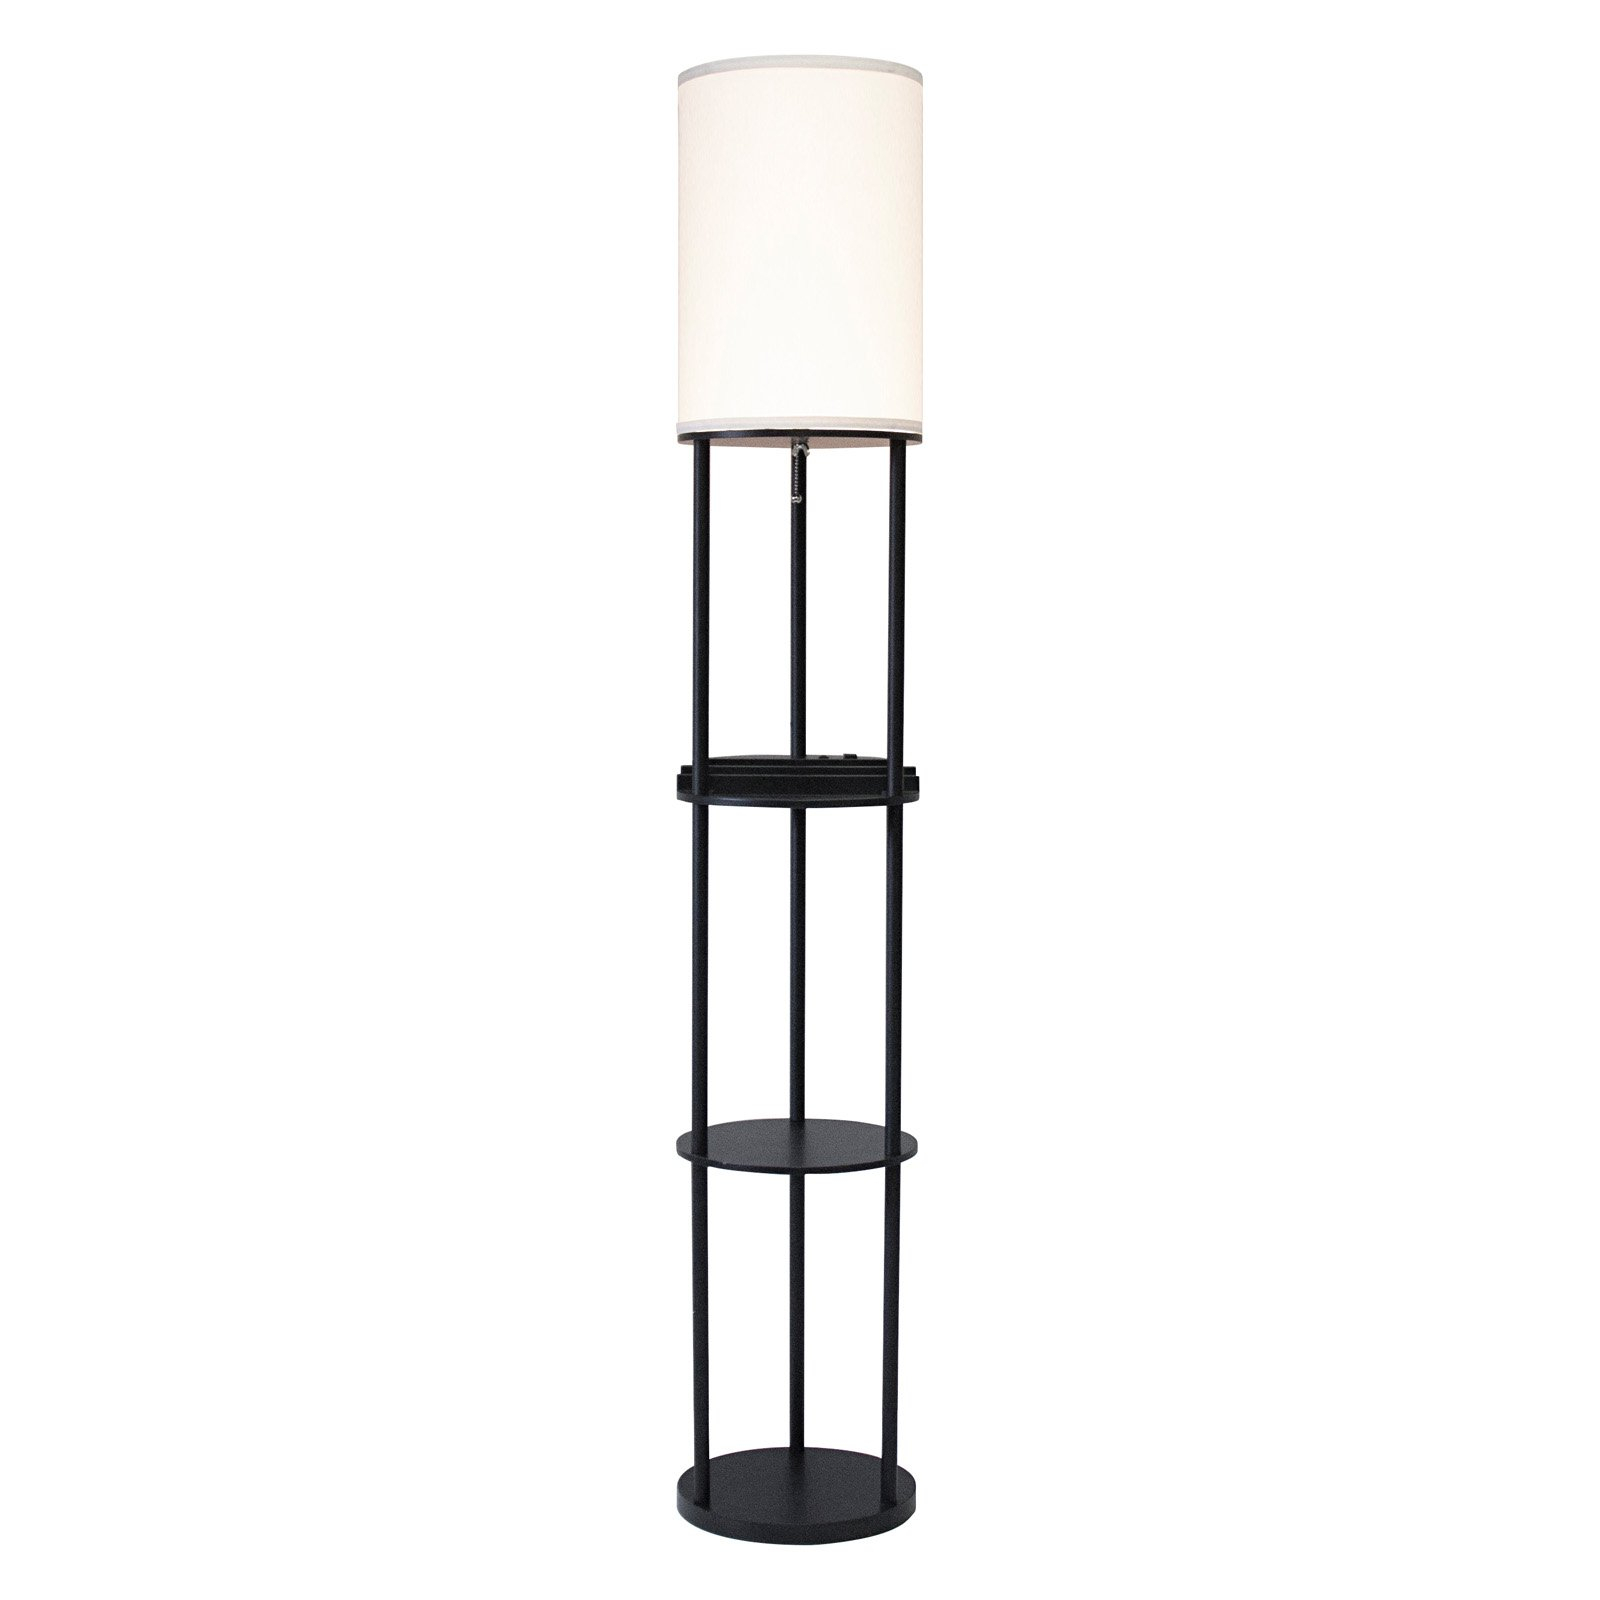 Adesso Charging Station Shelf Floor Lamp Walmart pertaining to proportions 1600 X 1600